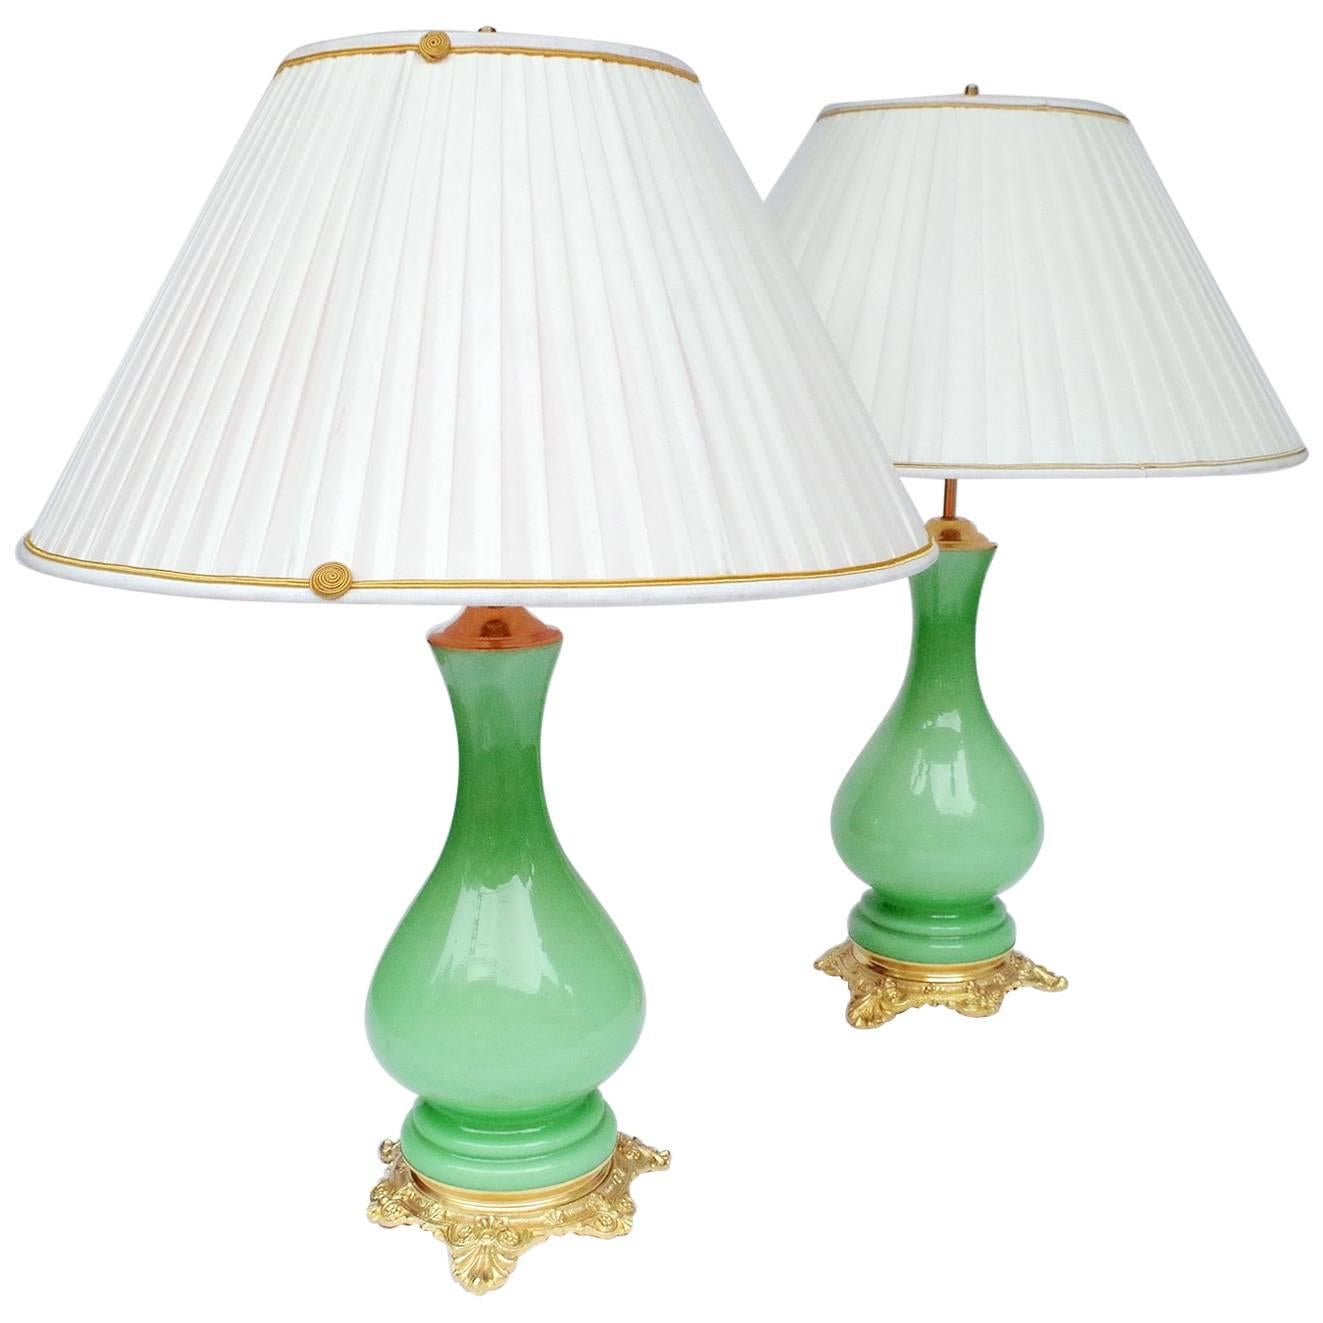 Pair of Baluster Shape Lamps in Green Opaline, circa 1880